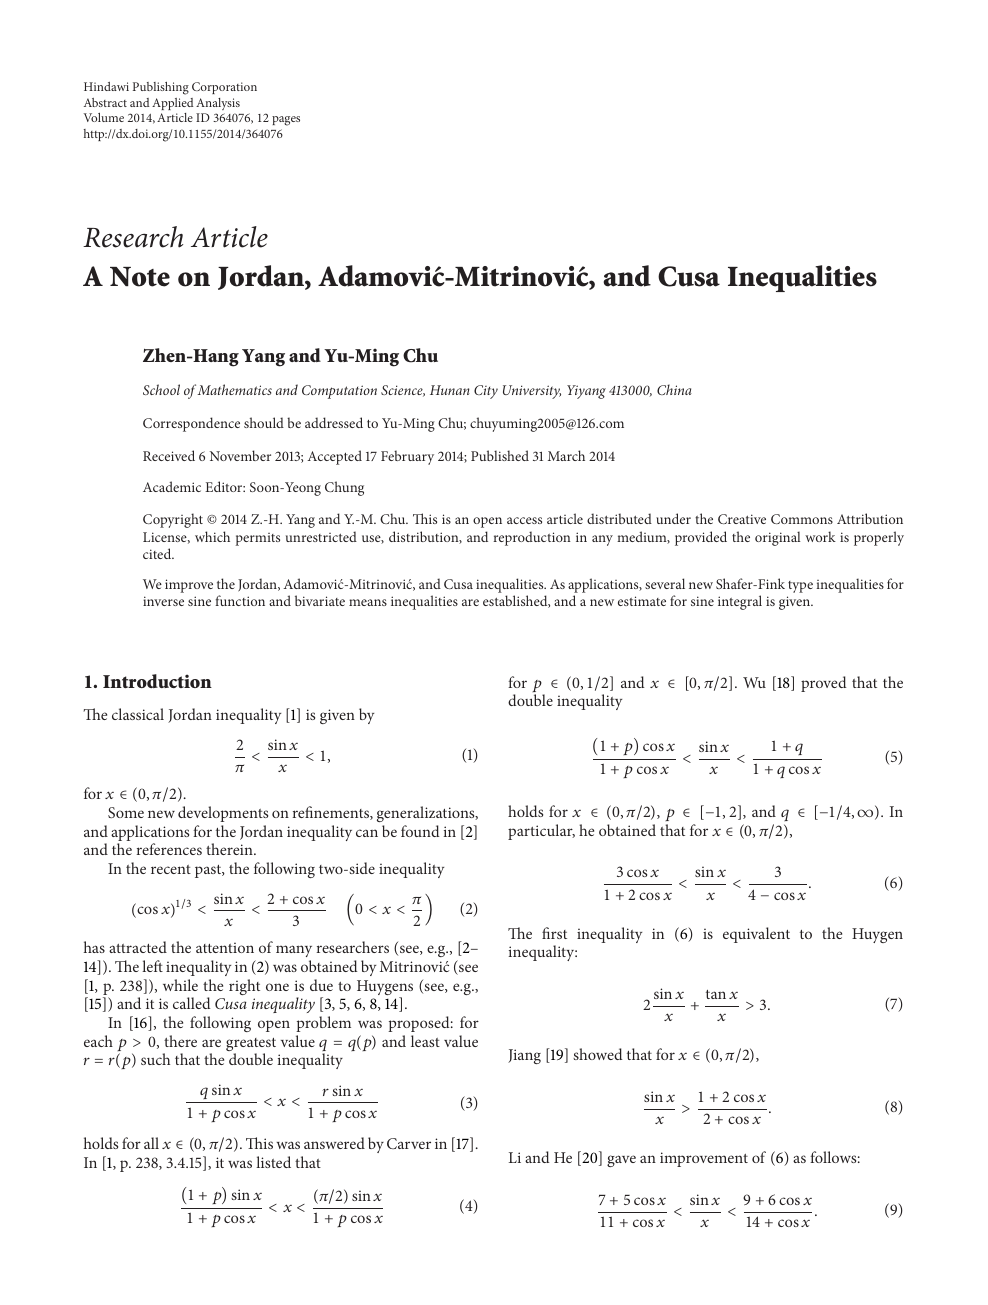 A Note On Jordan Adamovic Mitrinovic And Cusa Inequalities Topic Of Research Paper In Mathematics Download Scholarly Article Pdf And Read For Free On Cyberleninka Open Science Hub